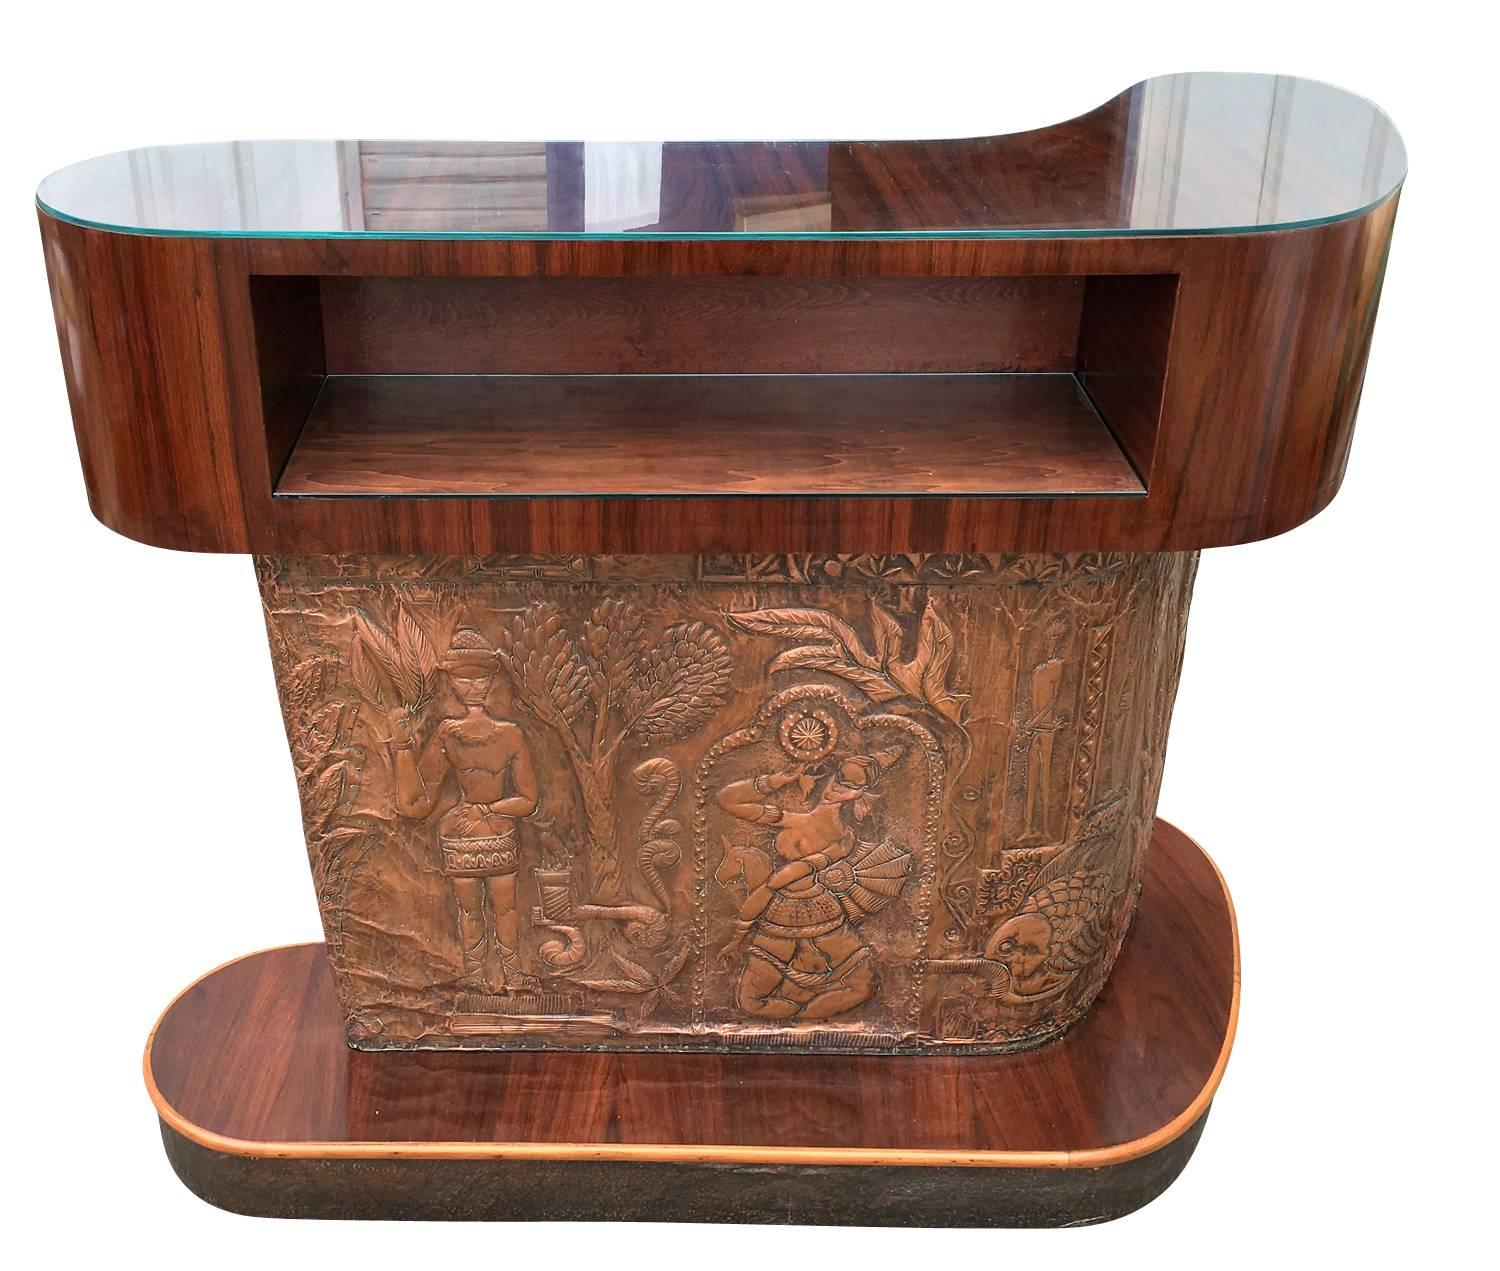 Extraordinary Mid Century dry bar counter which has a beautifully decorated embossed copper panel with a tribal motif that goes all the way around. The upper section is wood with an opening on one end and glass top. The base is also wood with a